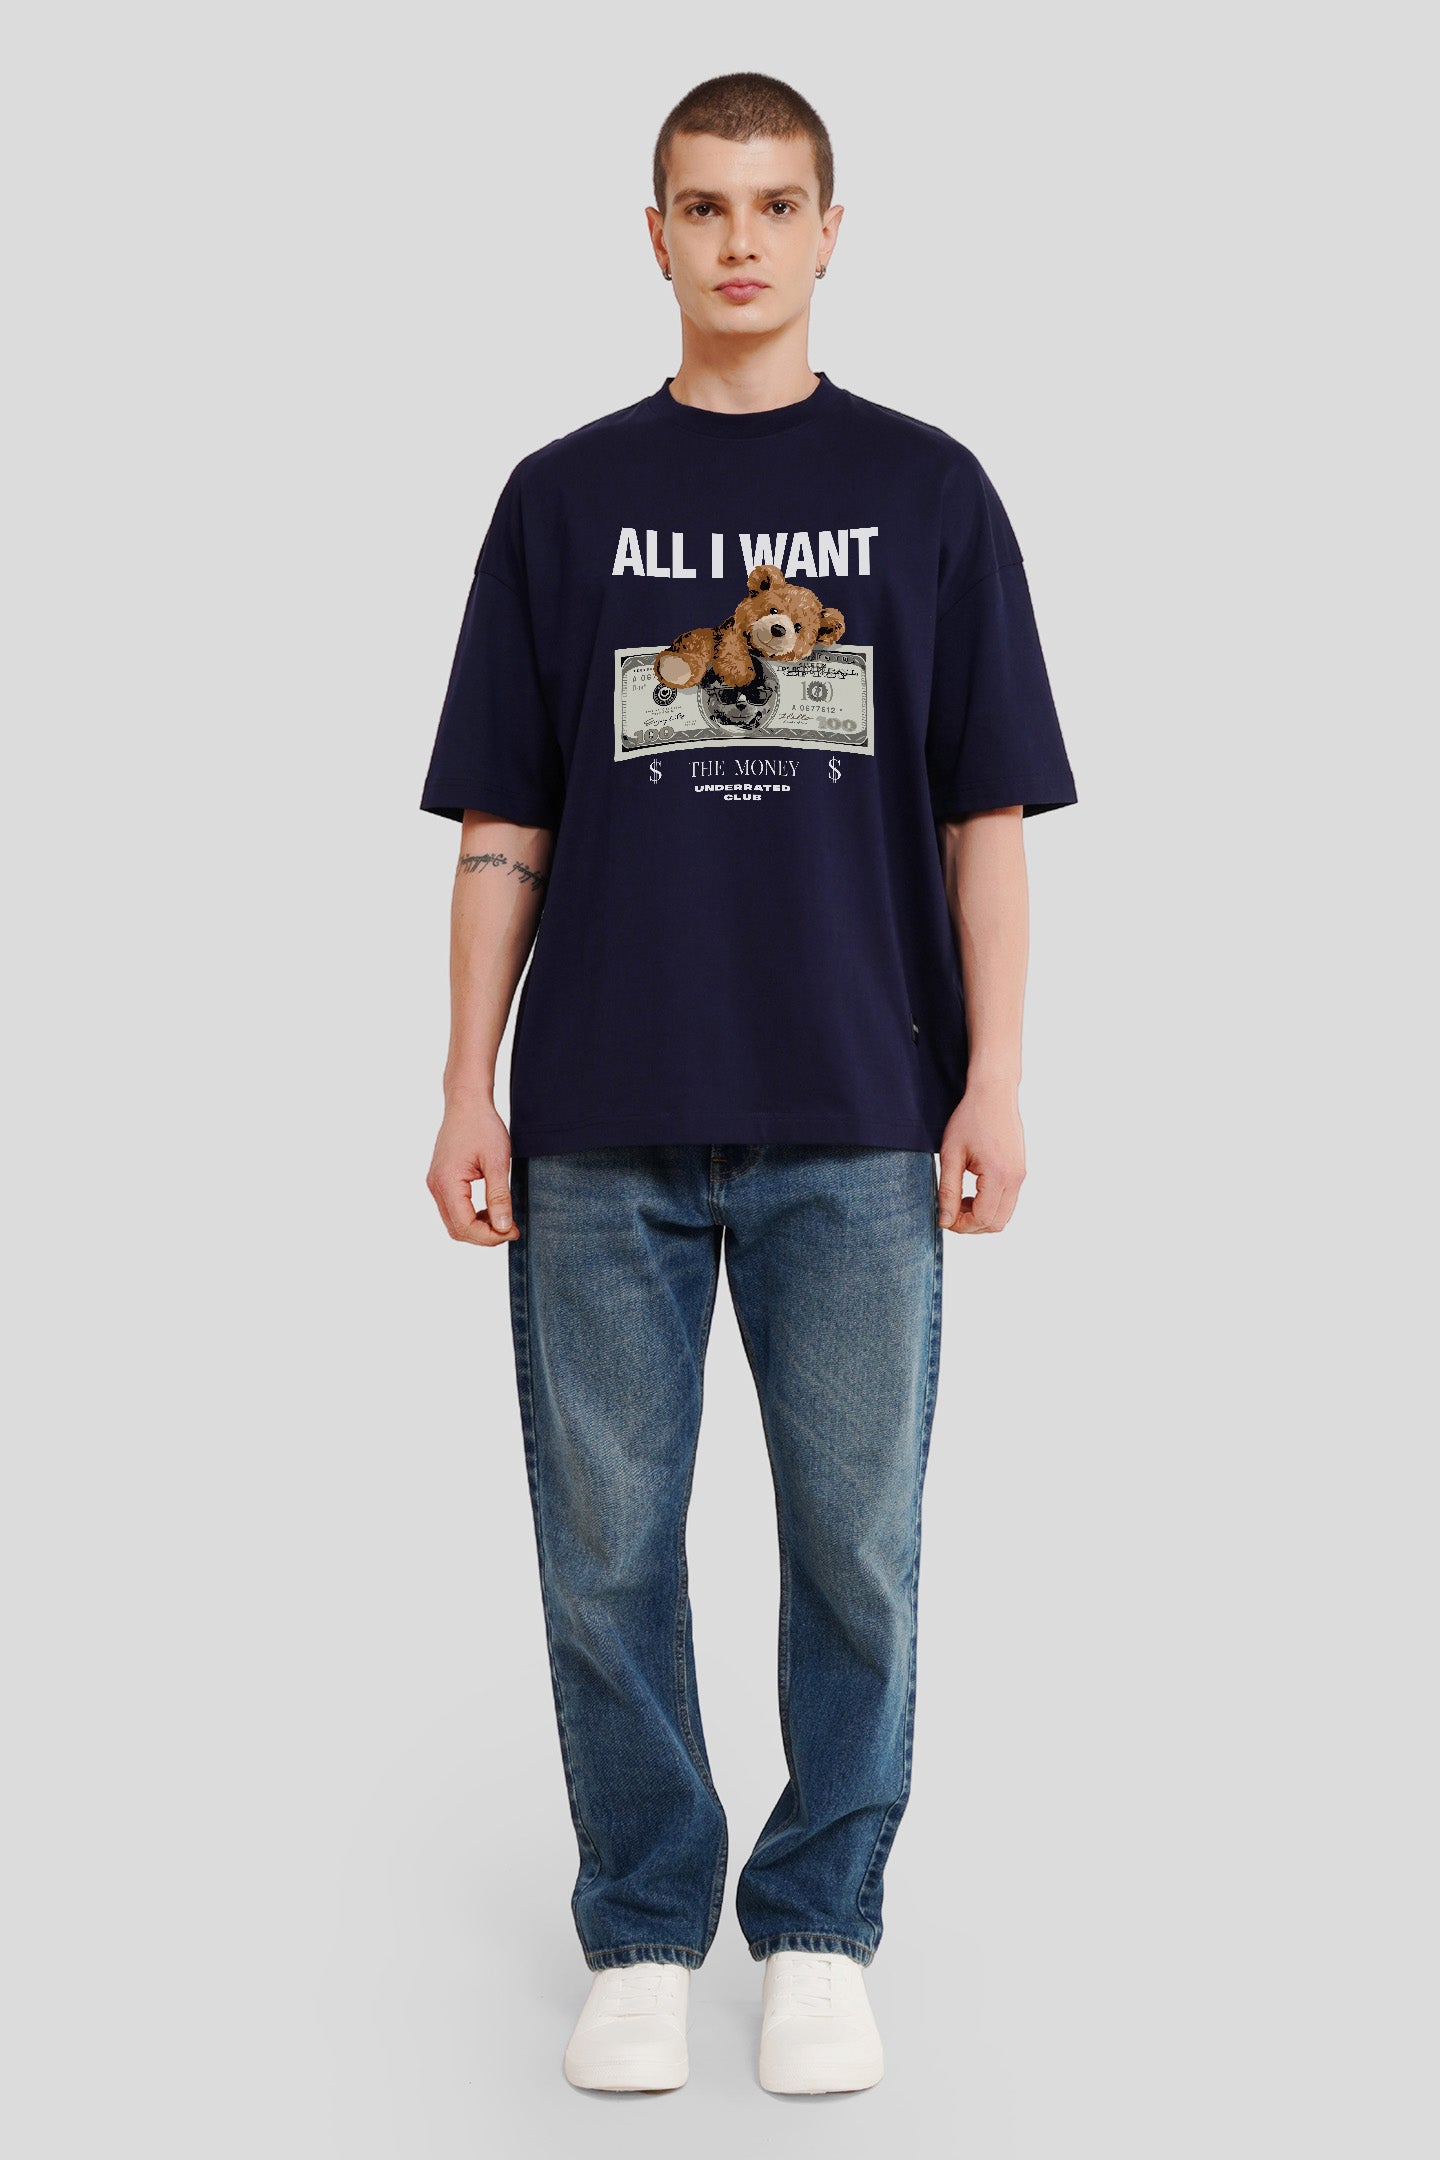 All I Want Navy Blue Printed T Shirt Men Baggy Fit With Front Design Pic 4